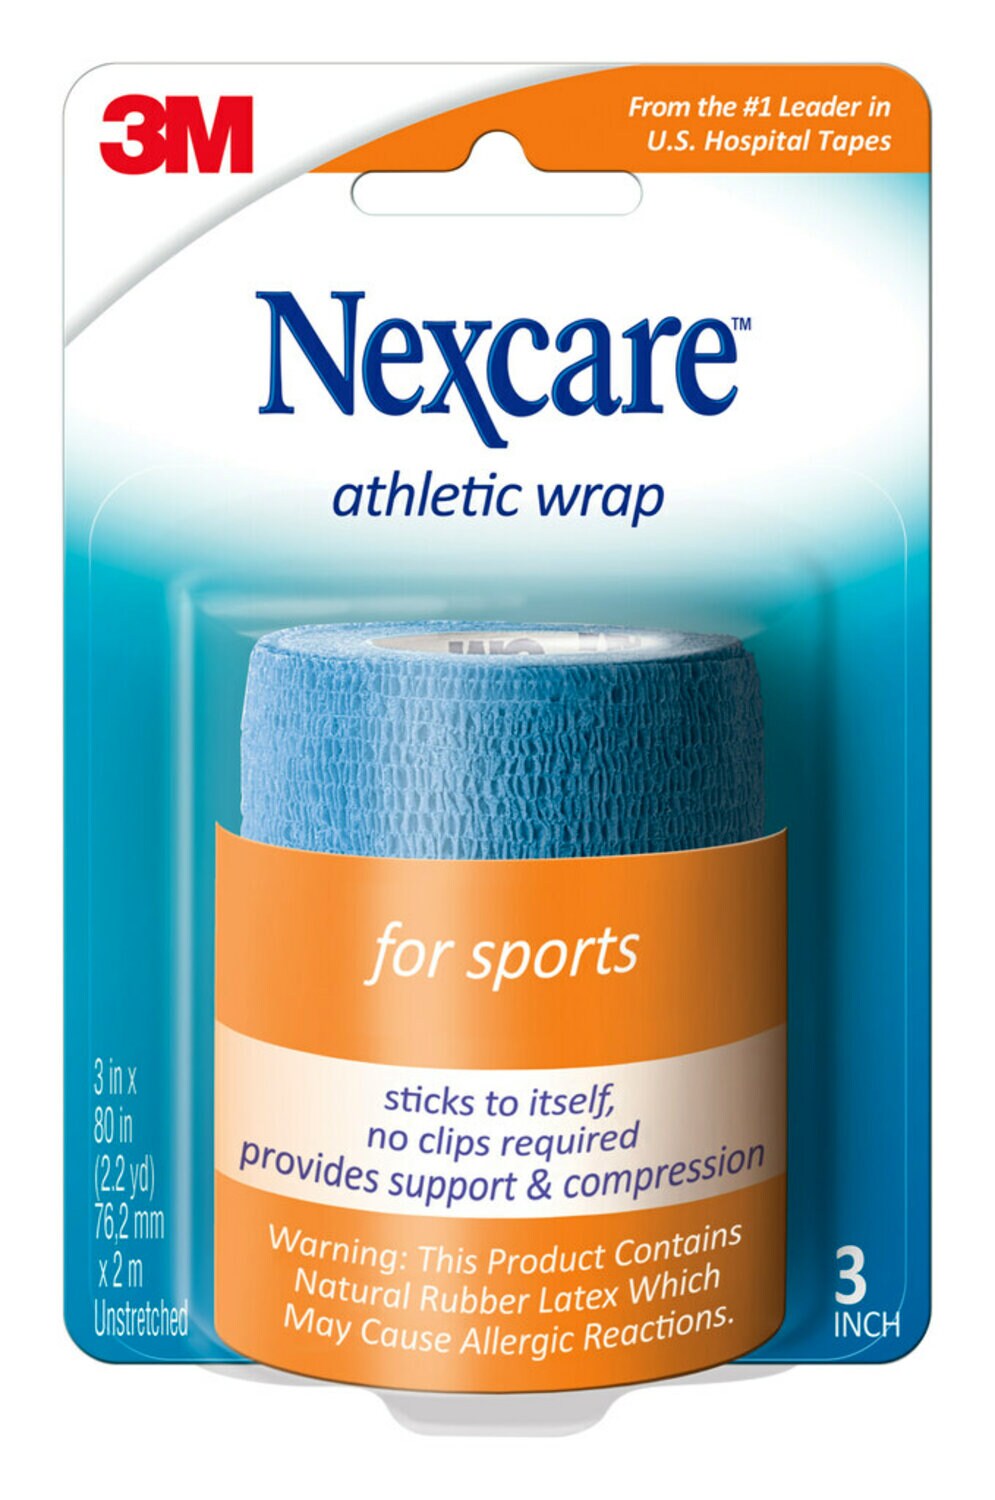 7100280696 - Nexcare No Hurt Wrap NHB-3, 3 in x 2.2 yd (76.2 mm x 2 m) unstretched, Blue